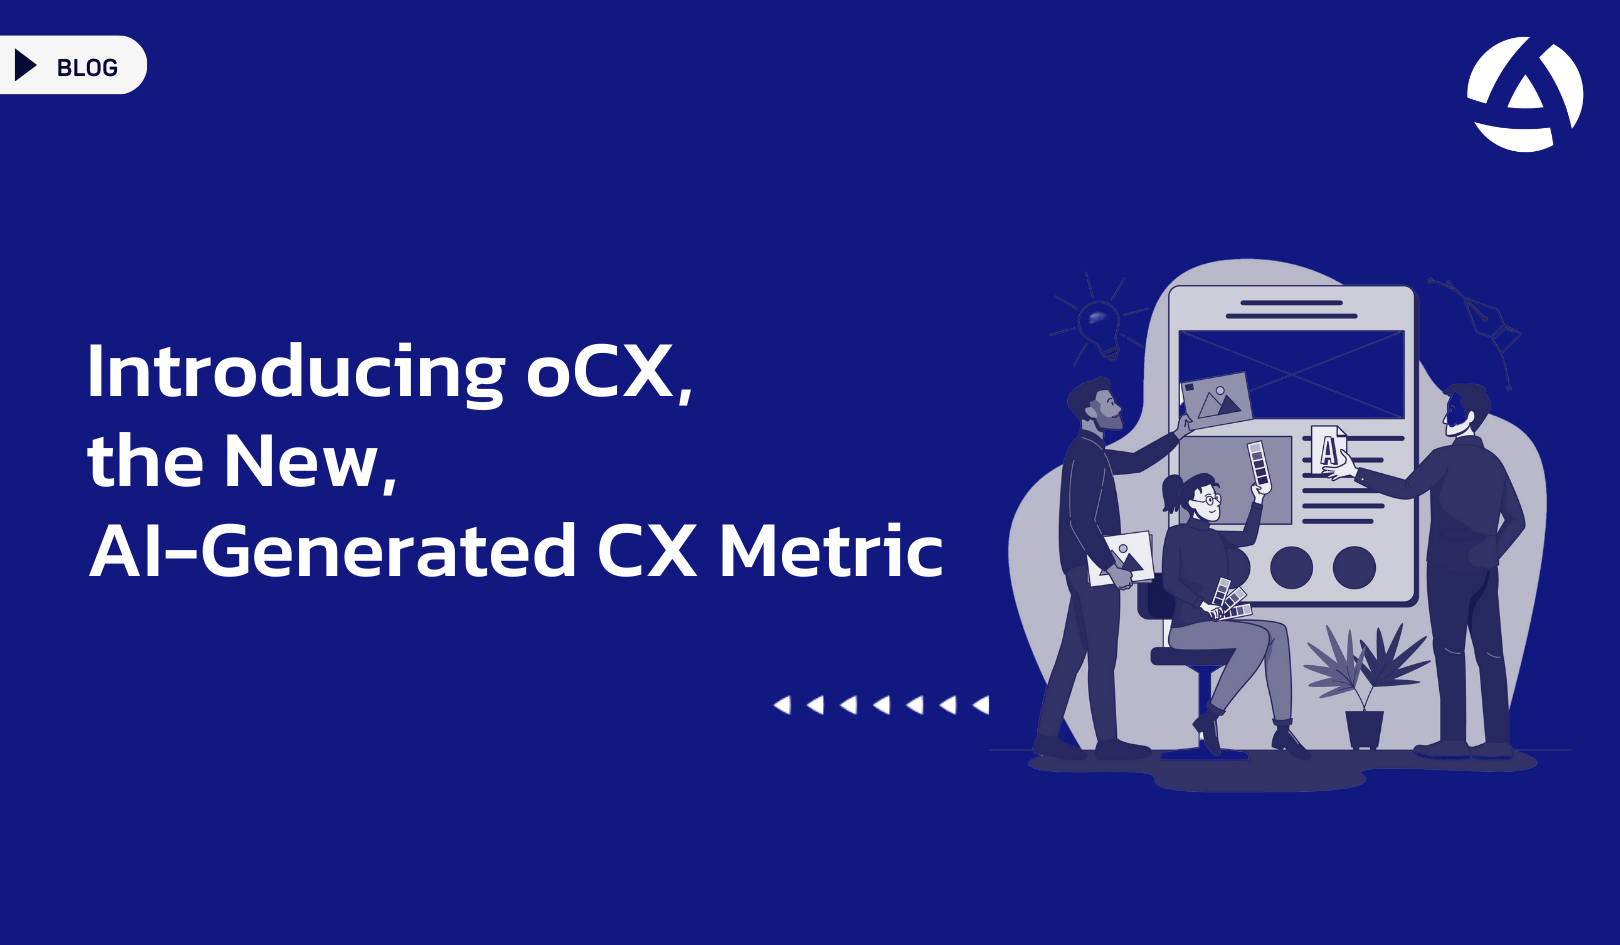 Introducing oCX, the New AI-Generated CX Metric